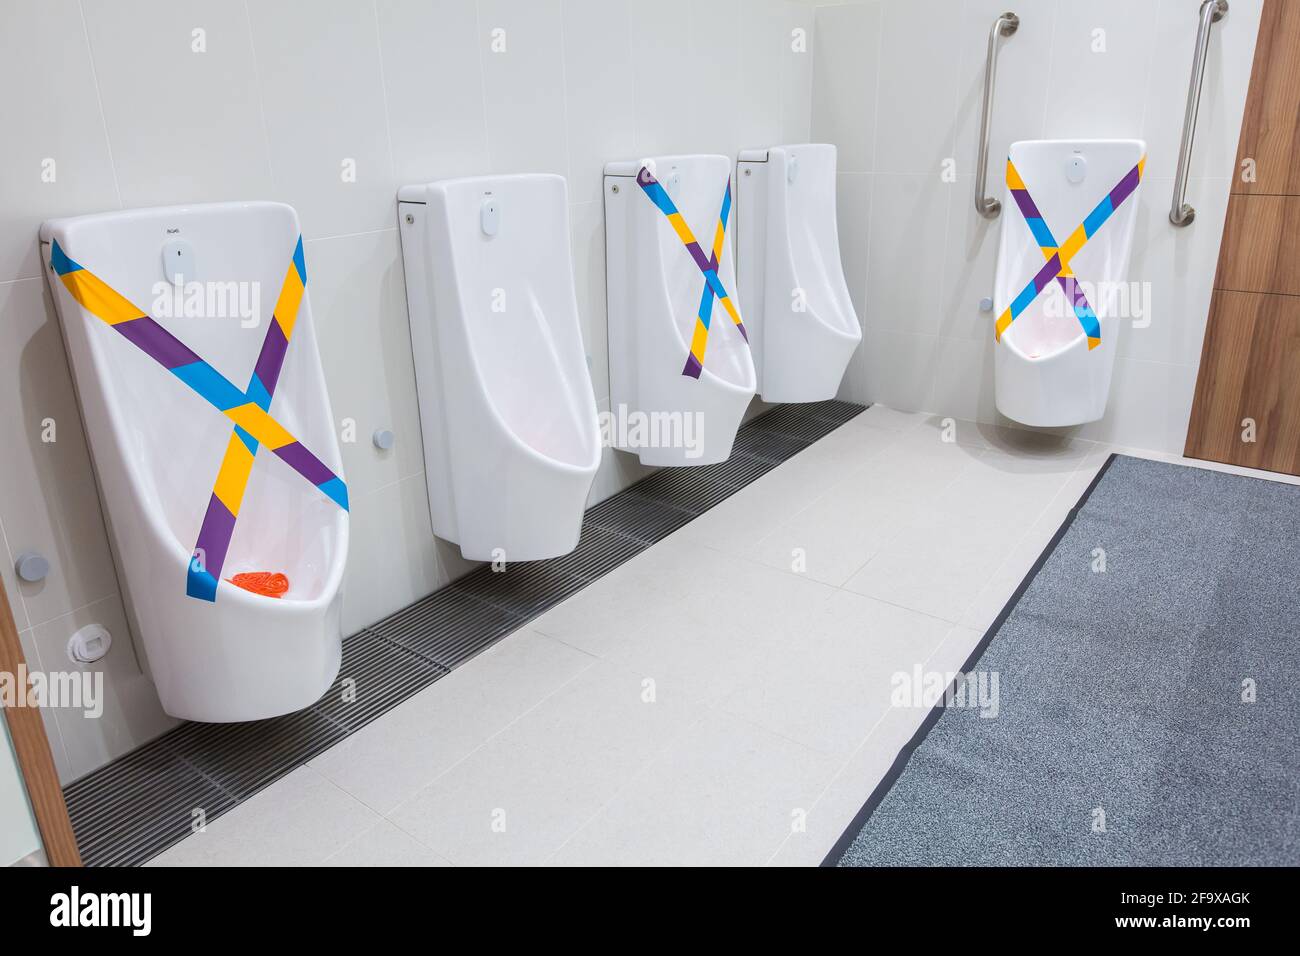 Safe distancing measure implemented in the toilet to reduce physical interaction for the well-being of public safety. Singapore. Stock Photo